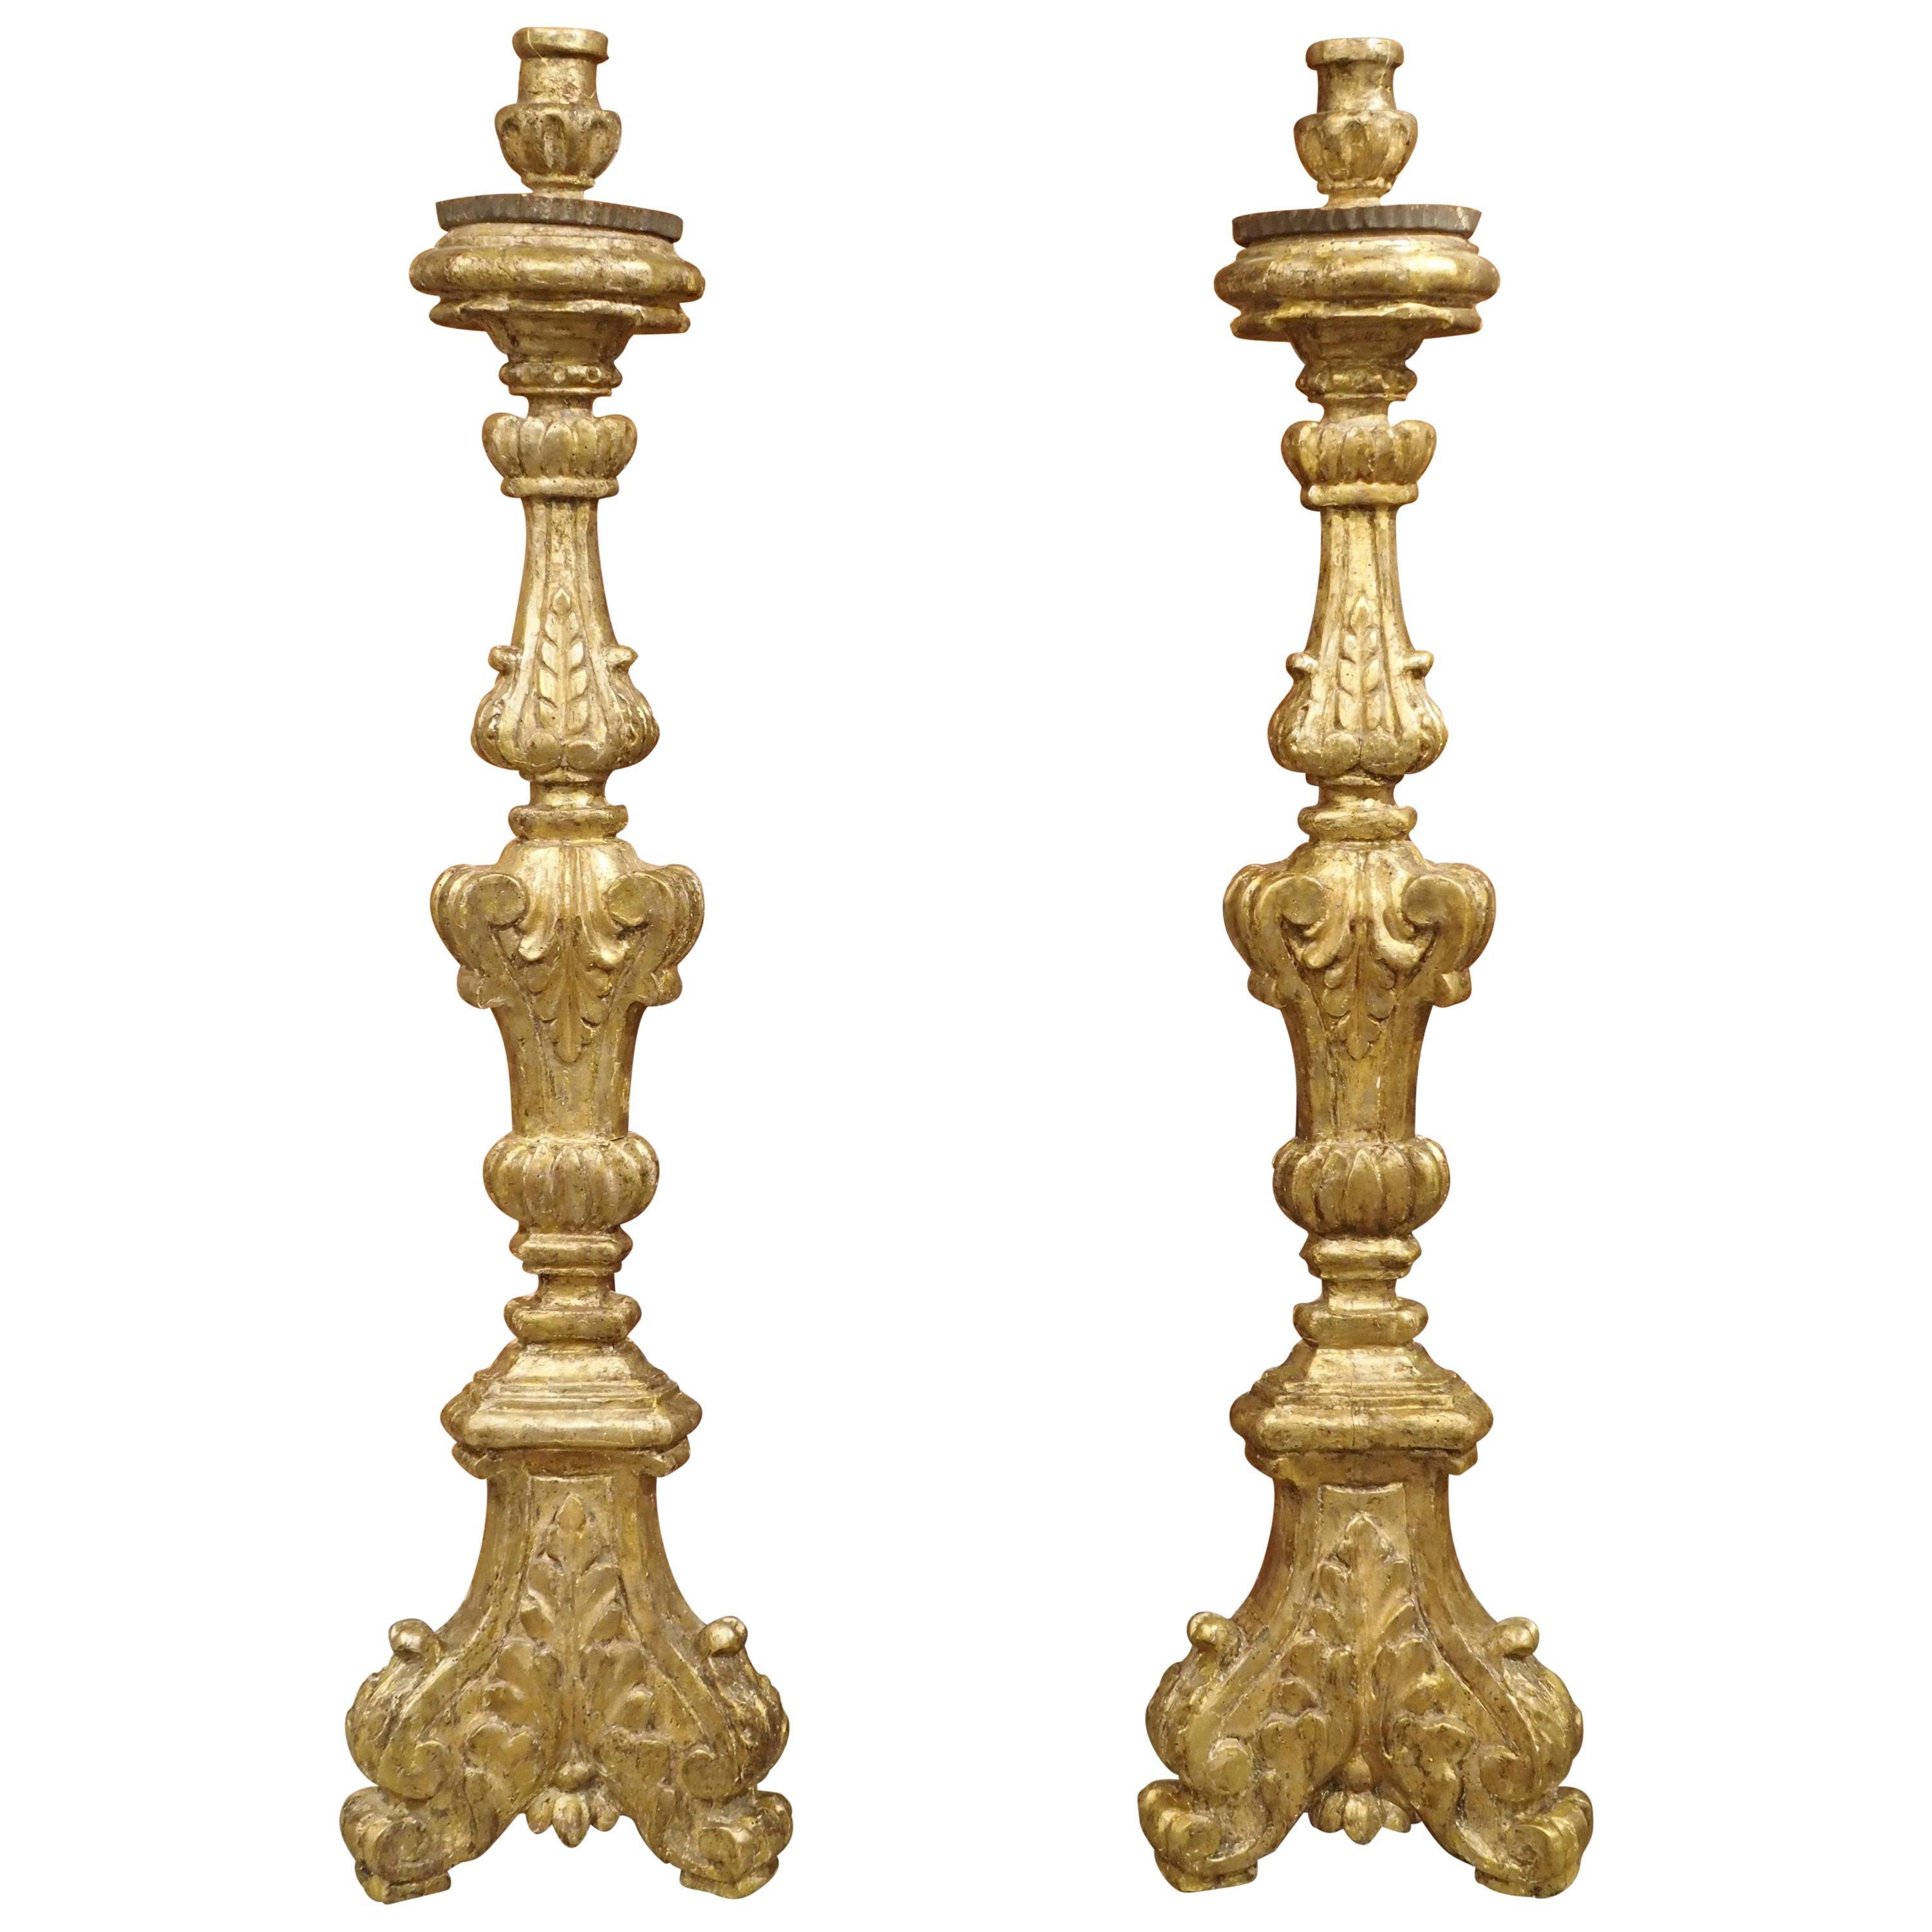 Pair of Tall 18th Century Giltwood Altar Candlesticks from France